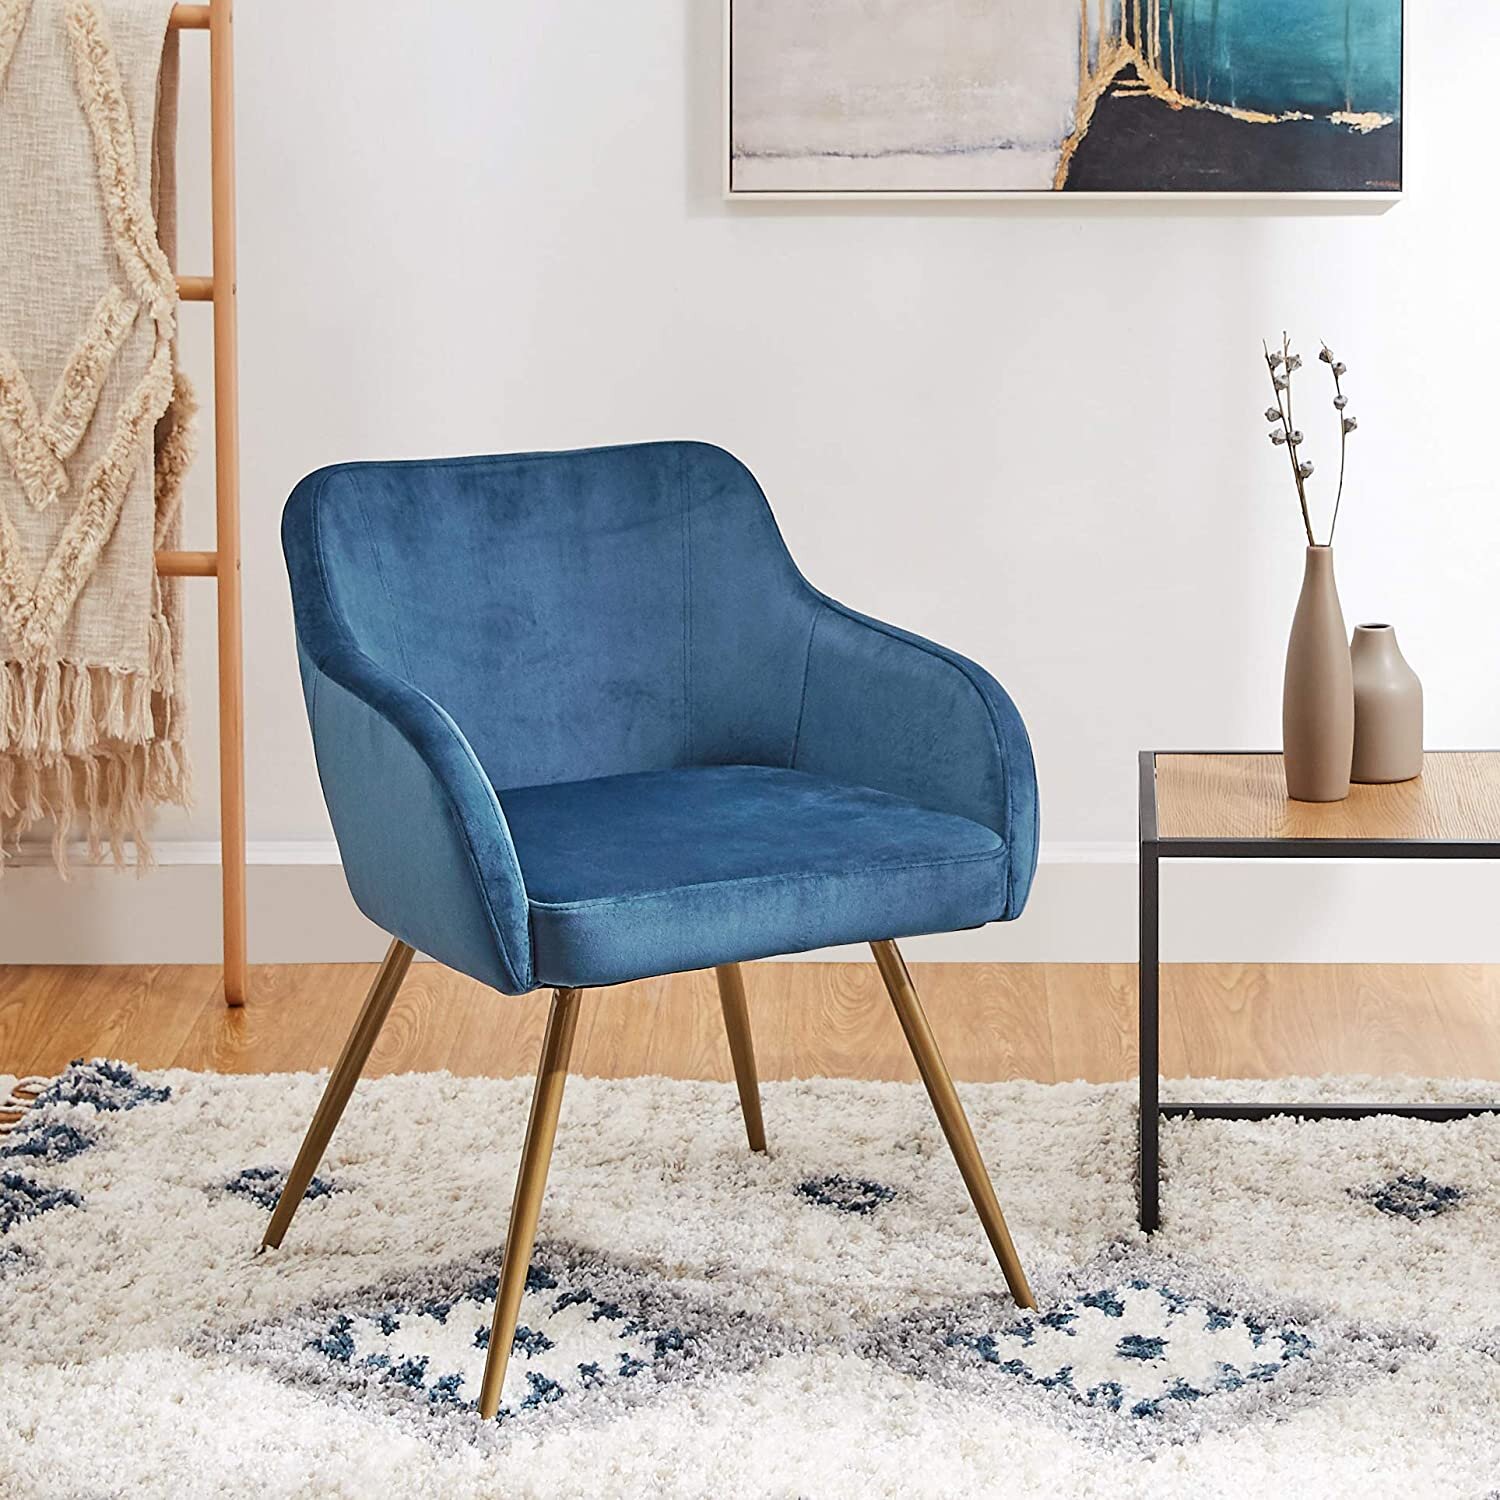 2, Blue1 Dining Chairs Set of 2 Mid Century Modern Velvet Kitchen Chairs Wood and Metal Legs Accent Side Chair for Living Room and Dinning Room